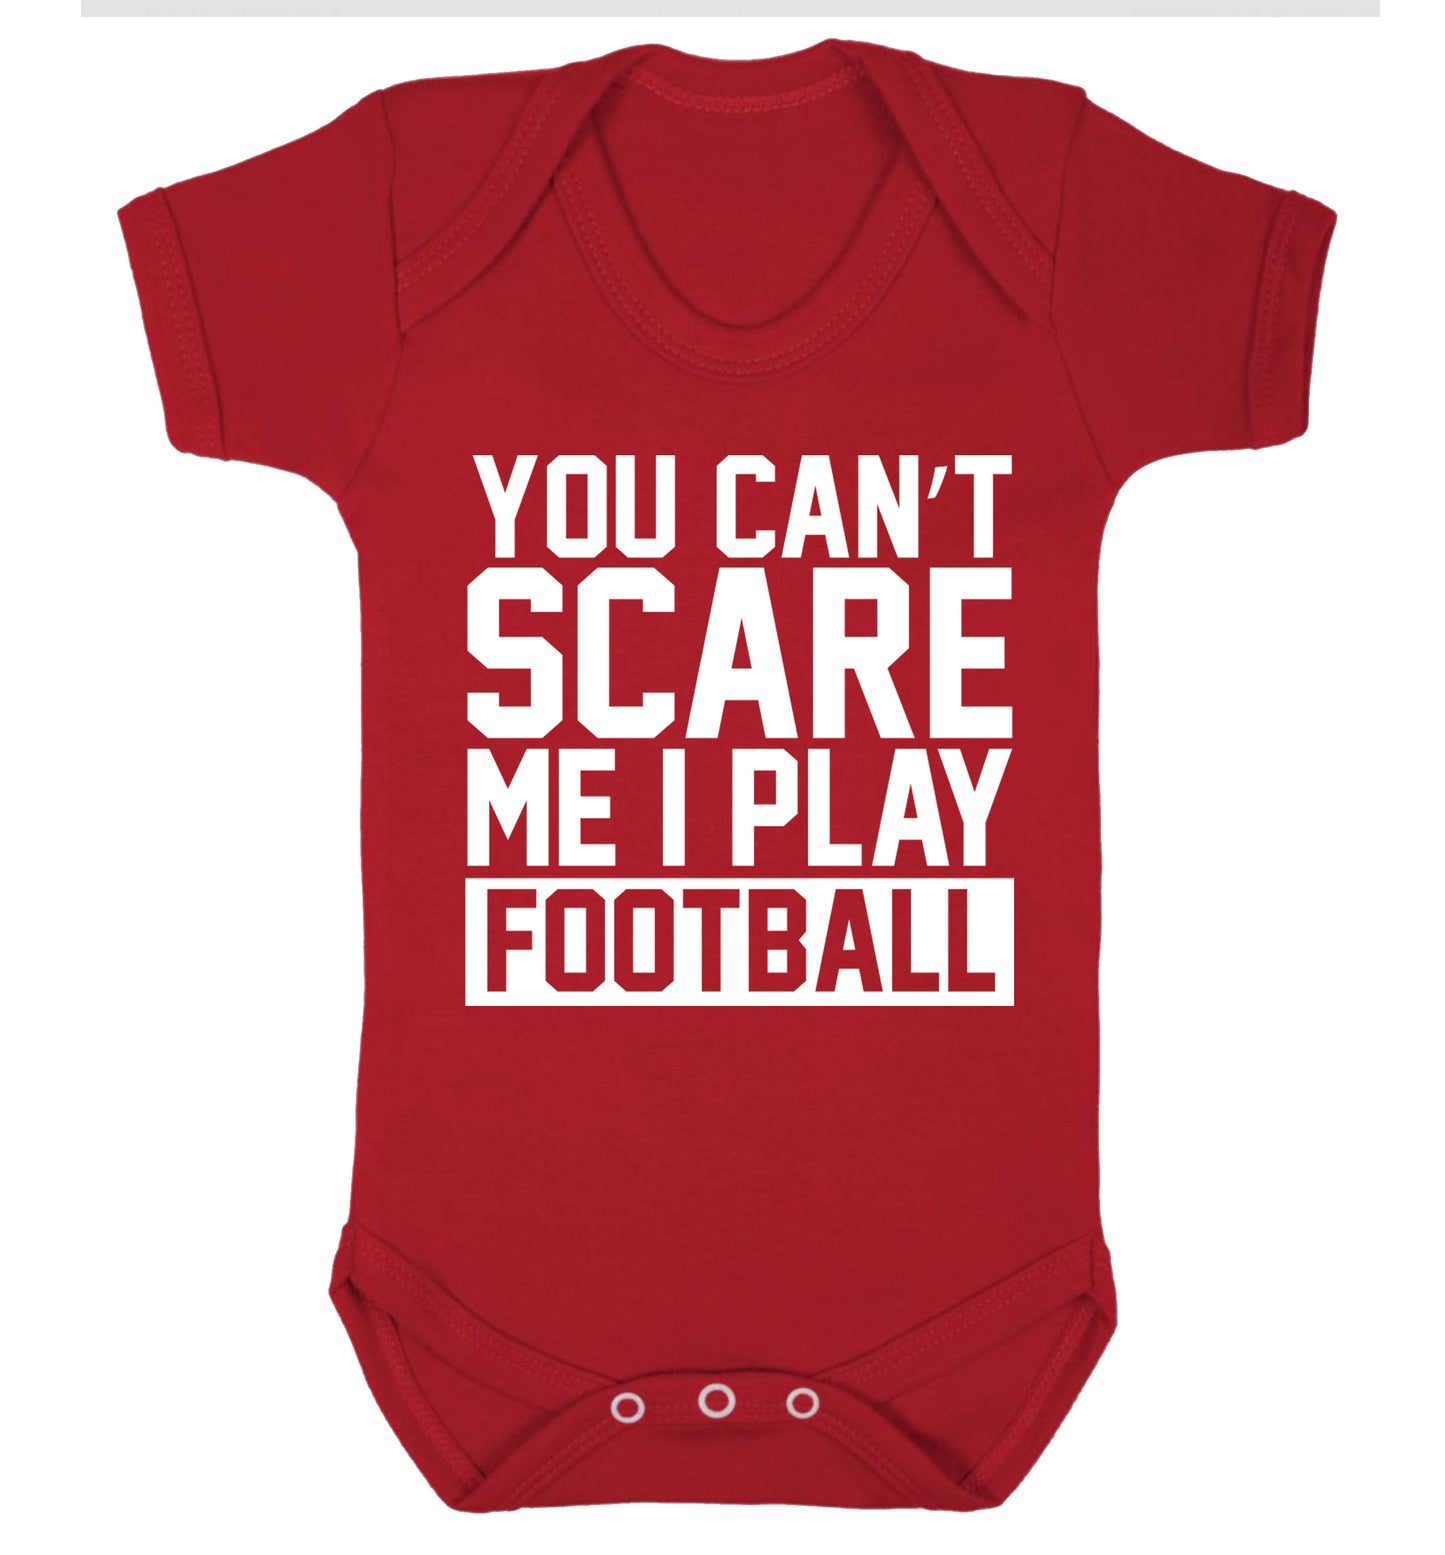 You can't scare me I play football Baby Vest red 18-24 months